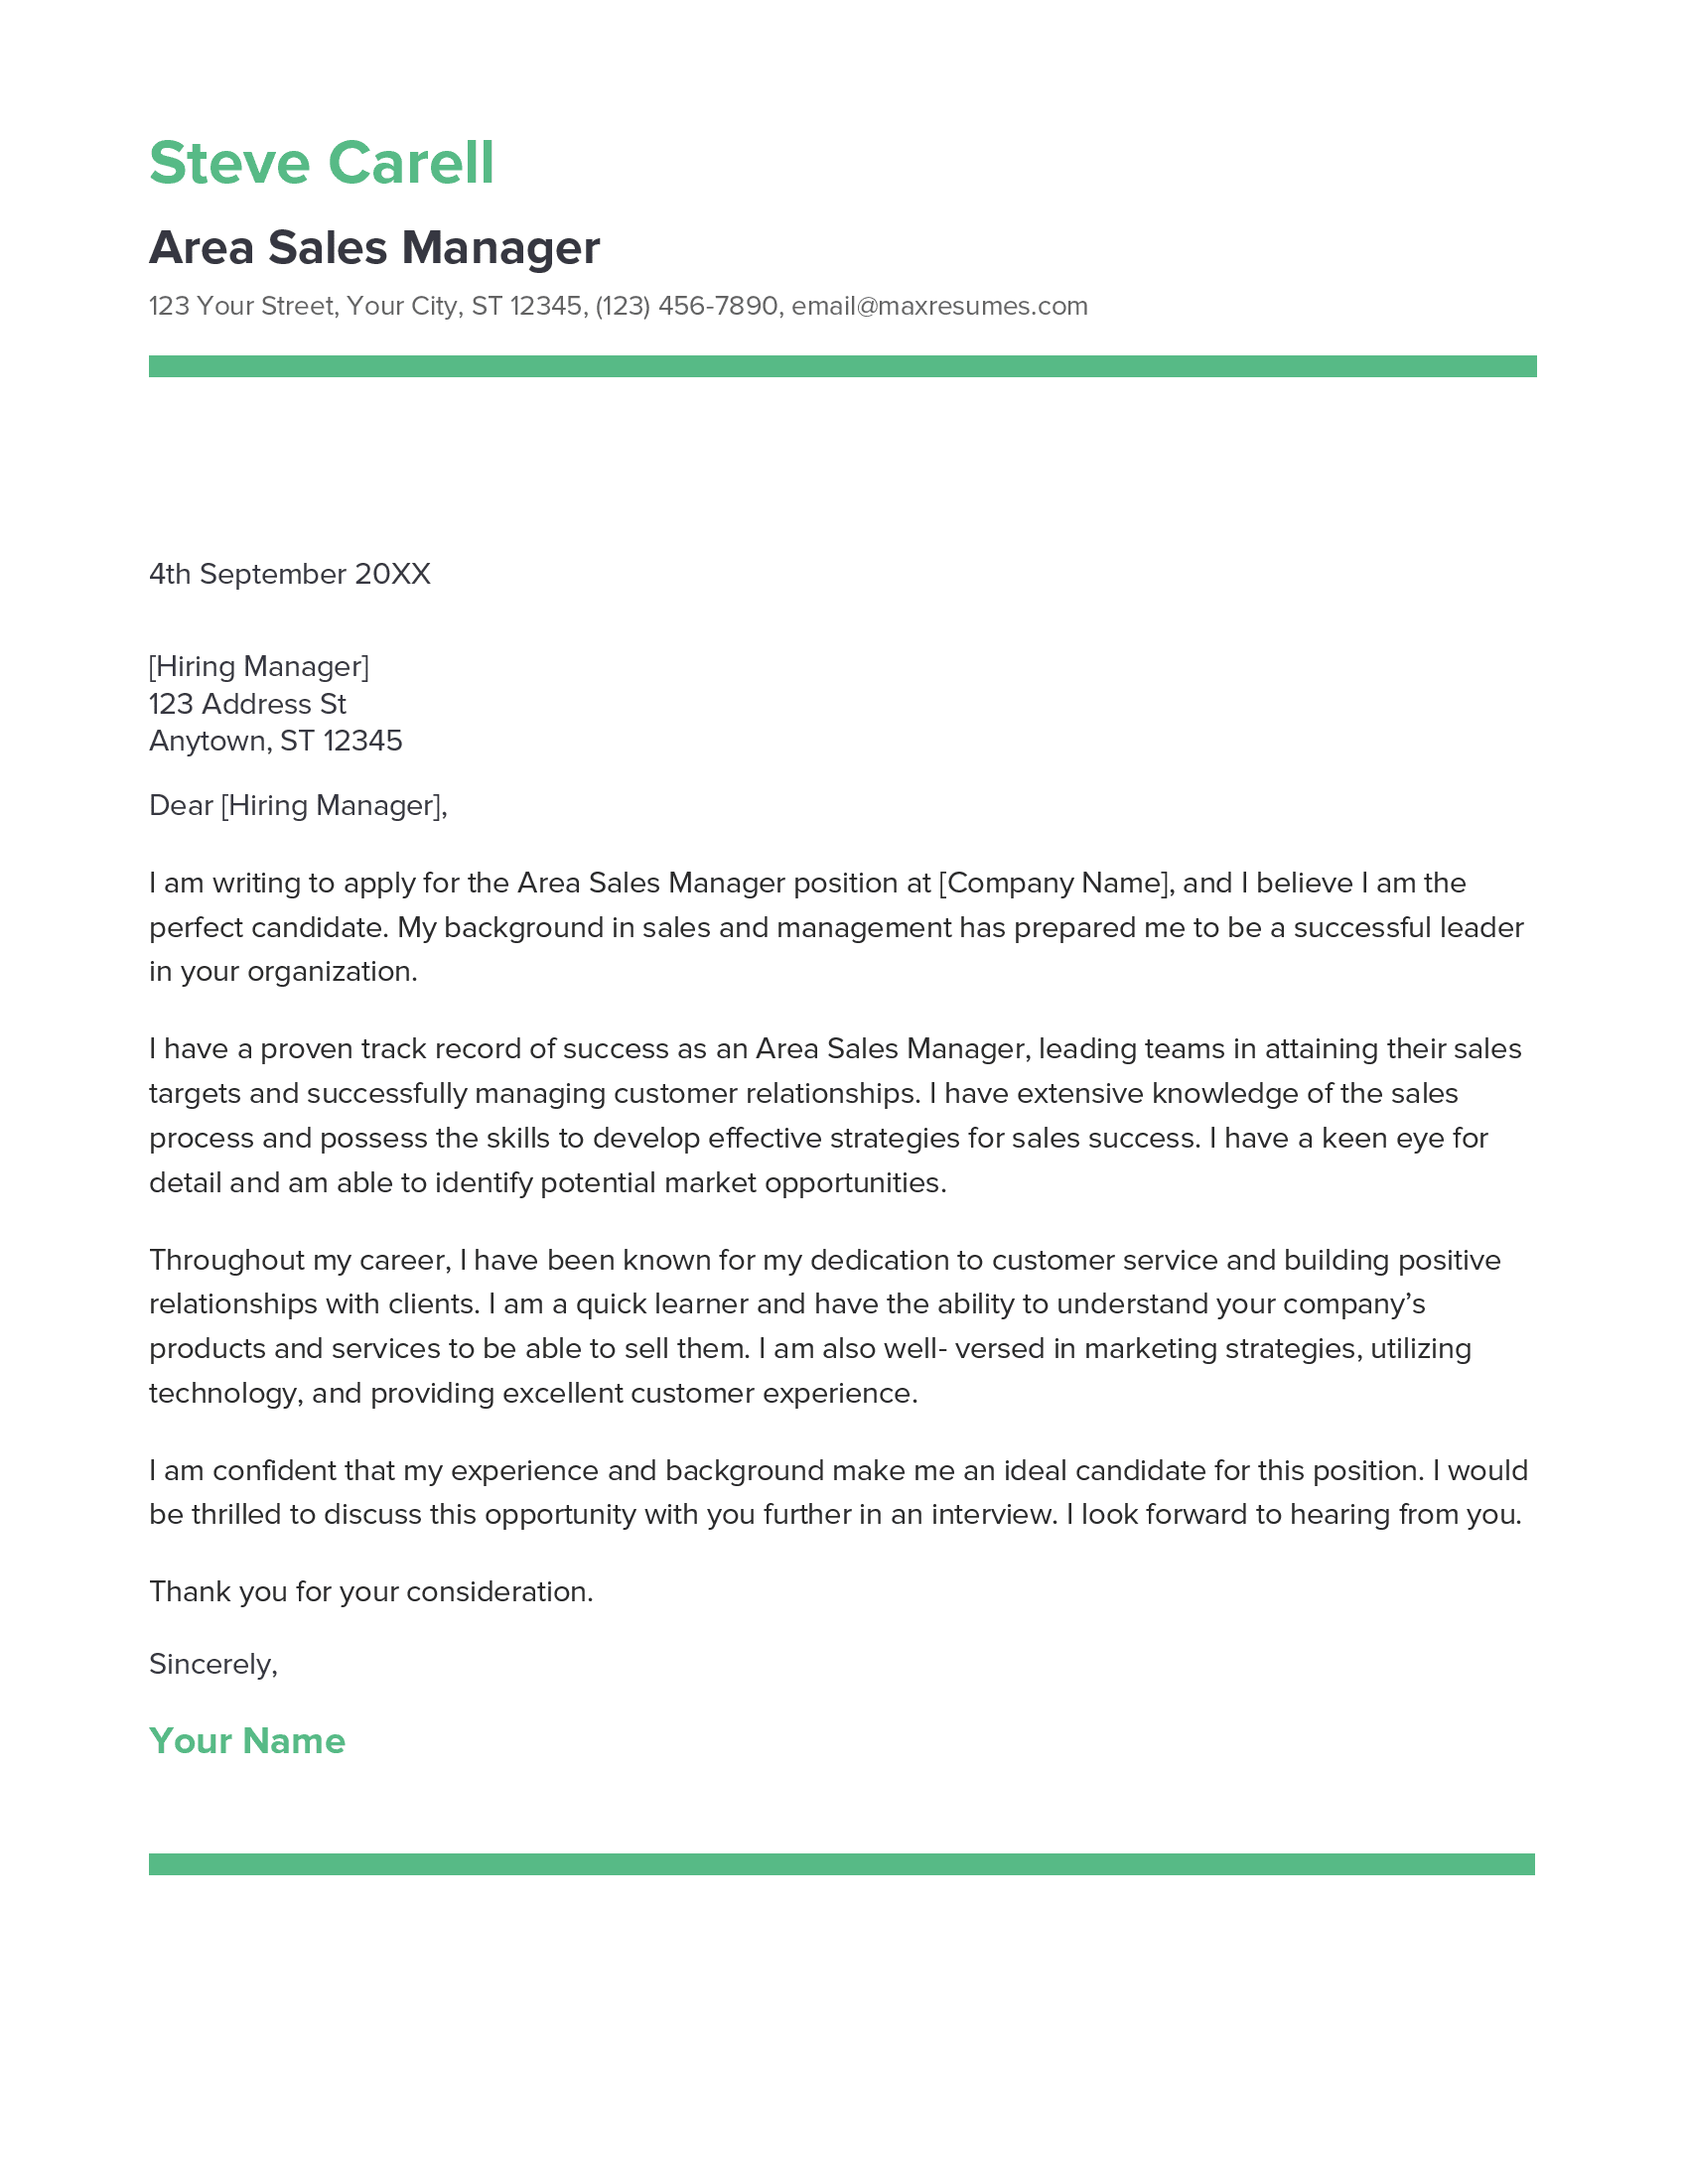 Area Sales Manager Cover Letter Example